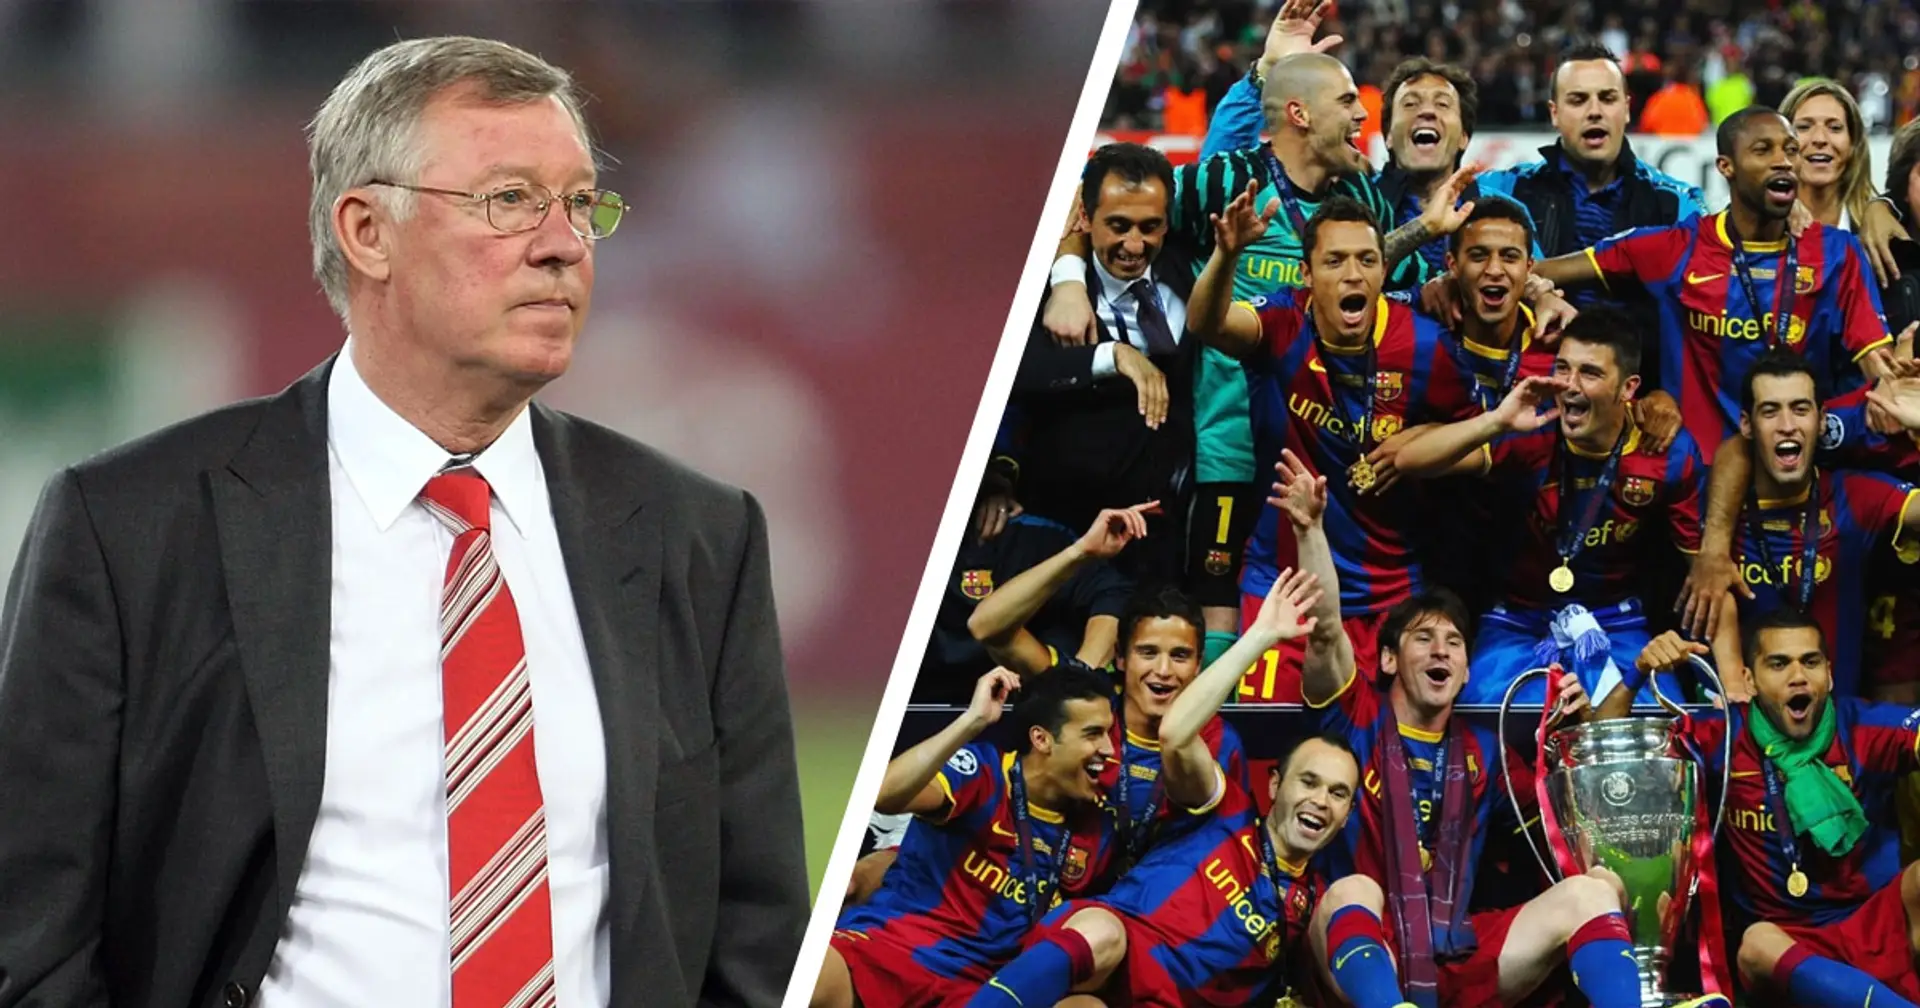 Sir Alex Ferguson claims 2011 Barca are the side that deserve the 'dream team' label the most